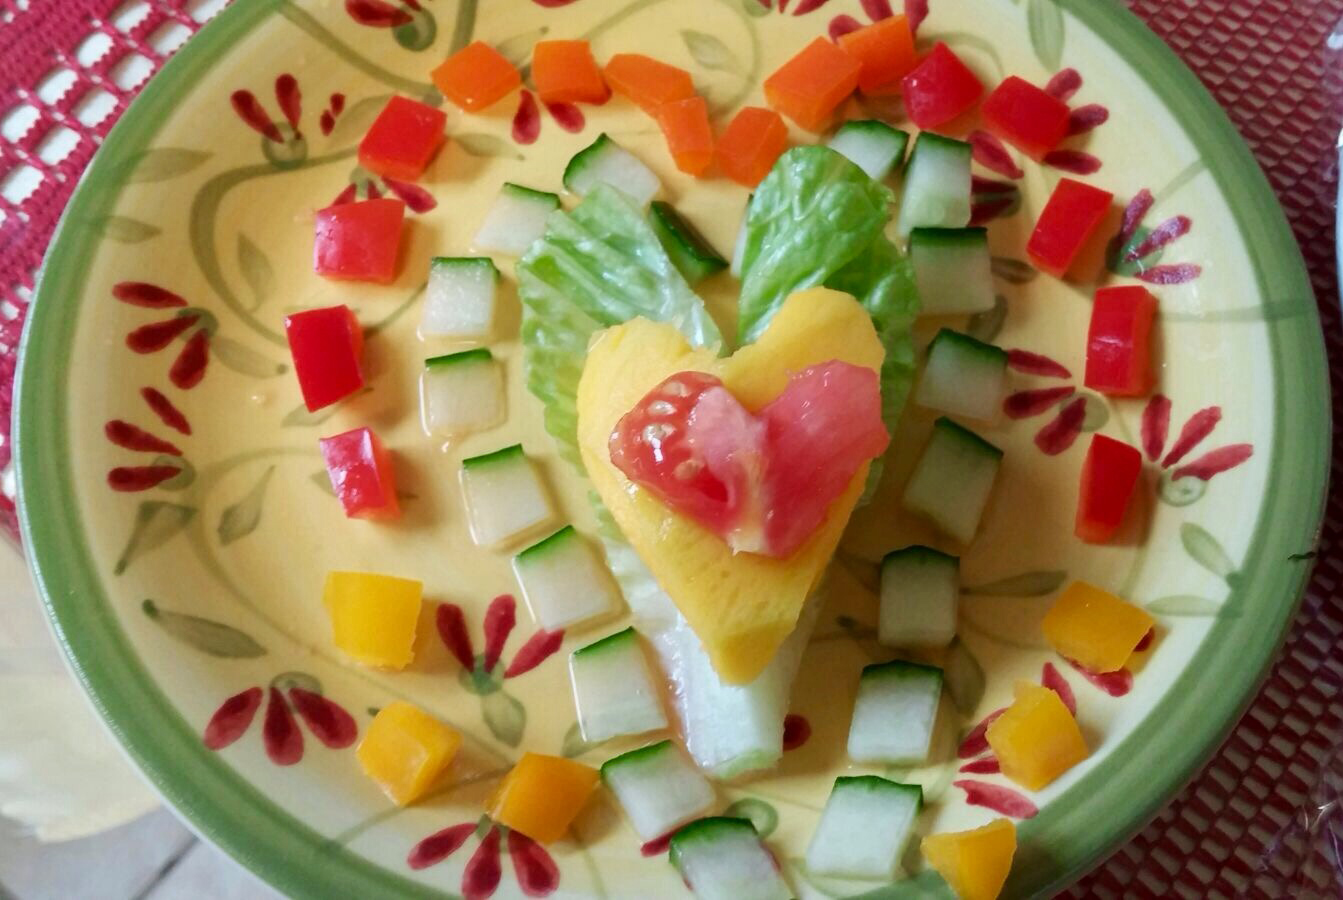 Carved and arranged fruits and vegetables forming a heart